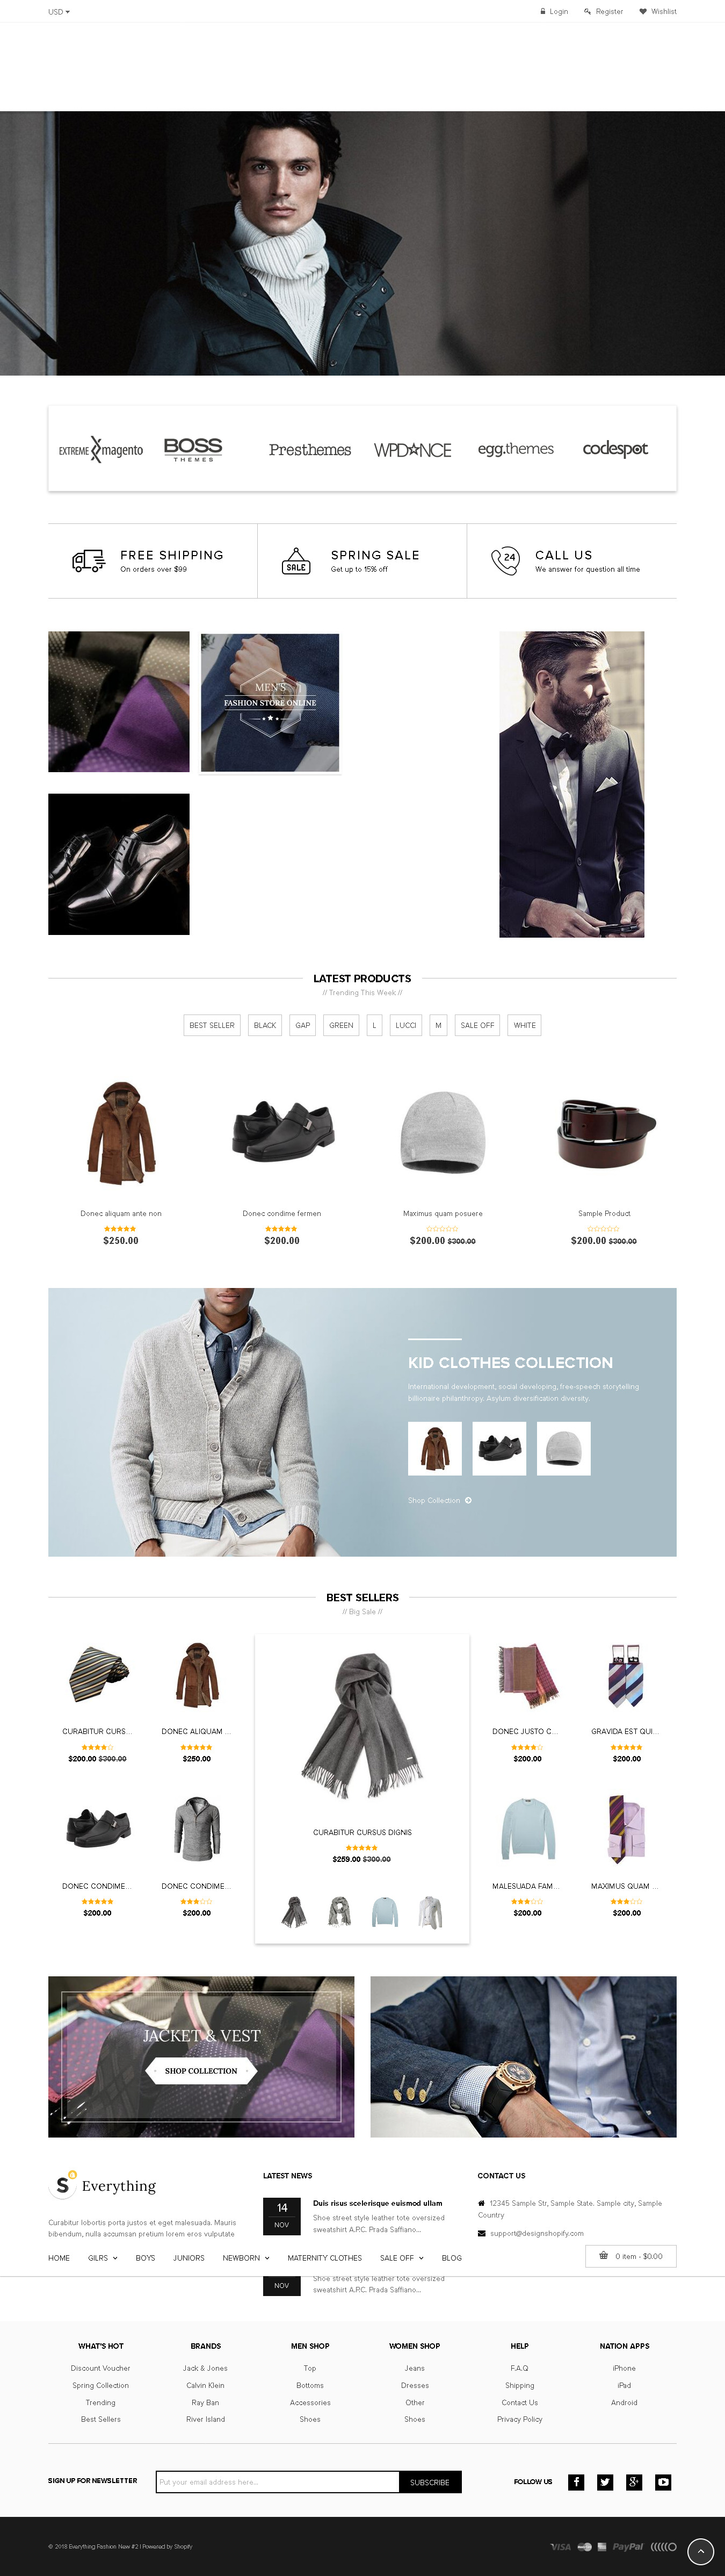 Best Shopify themes for men wear - Everything - Multipurpose Premium Responsive Shopify Themes - Fashion, Electronics, Cosmetics, Gifts